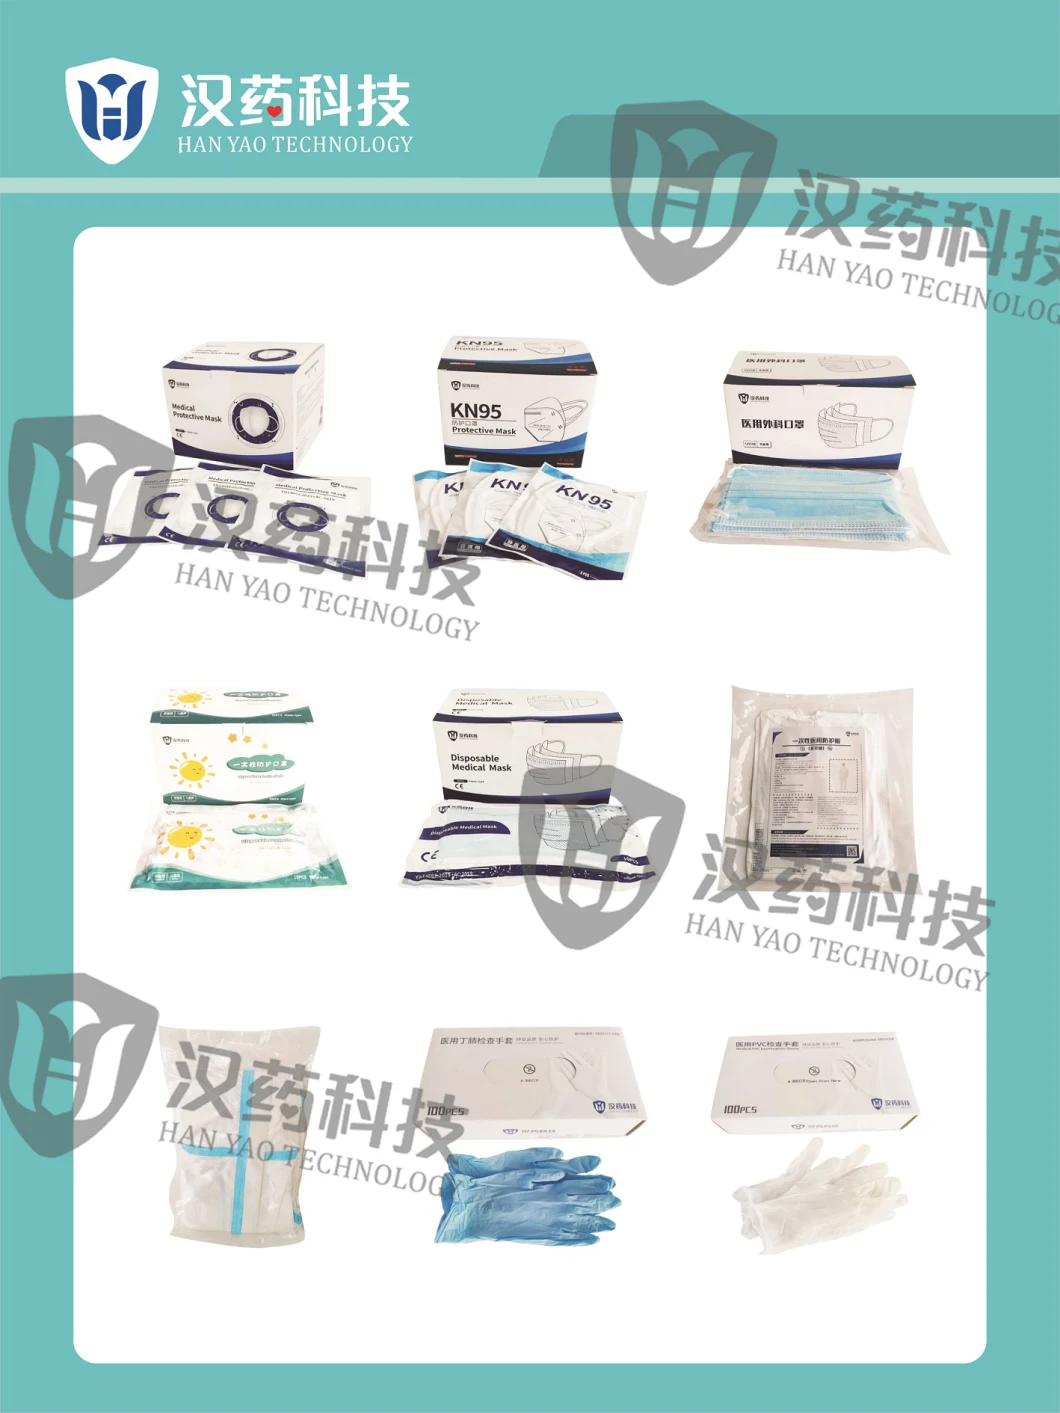 Folded-Type Medical Disposable Face Mask Private Label in Box for Masks